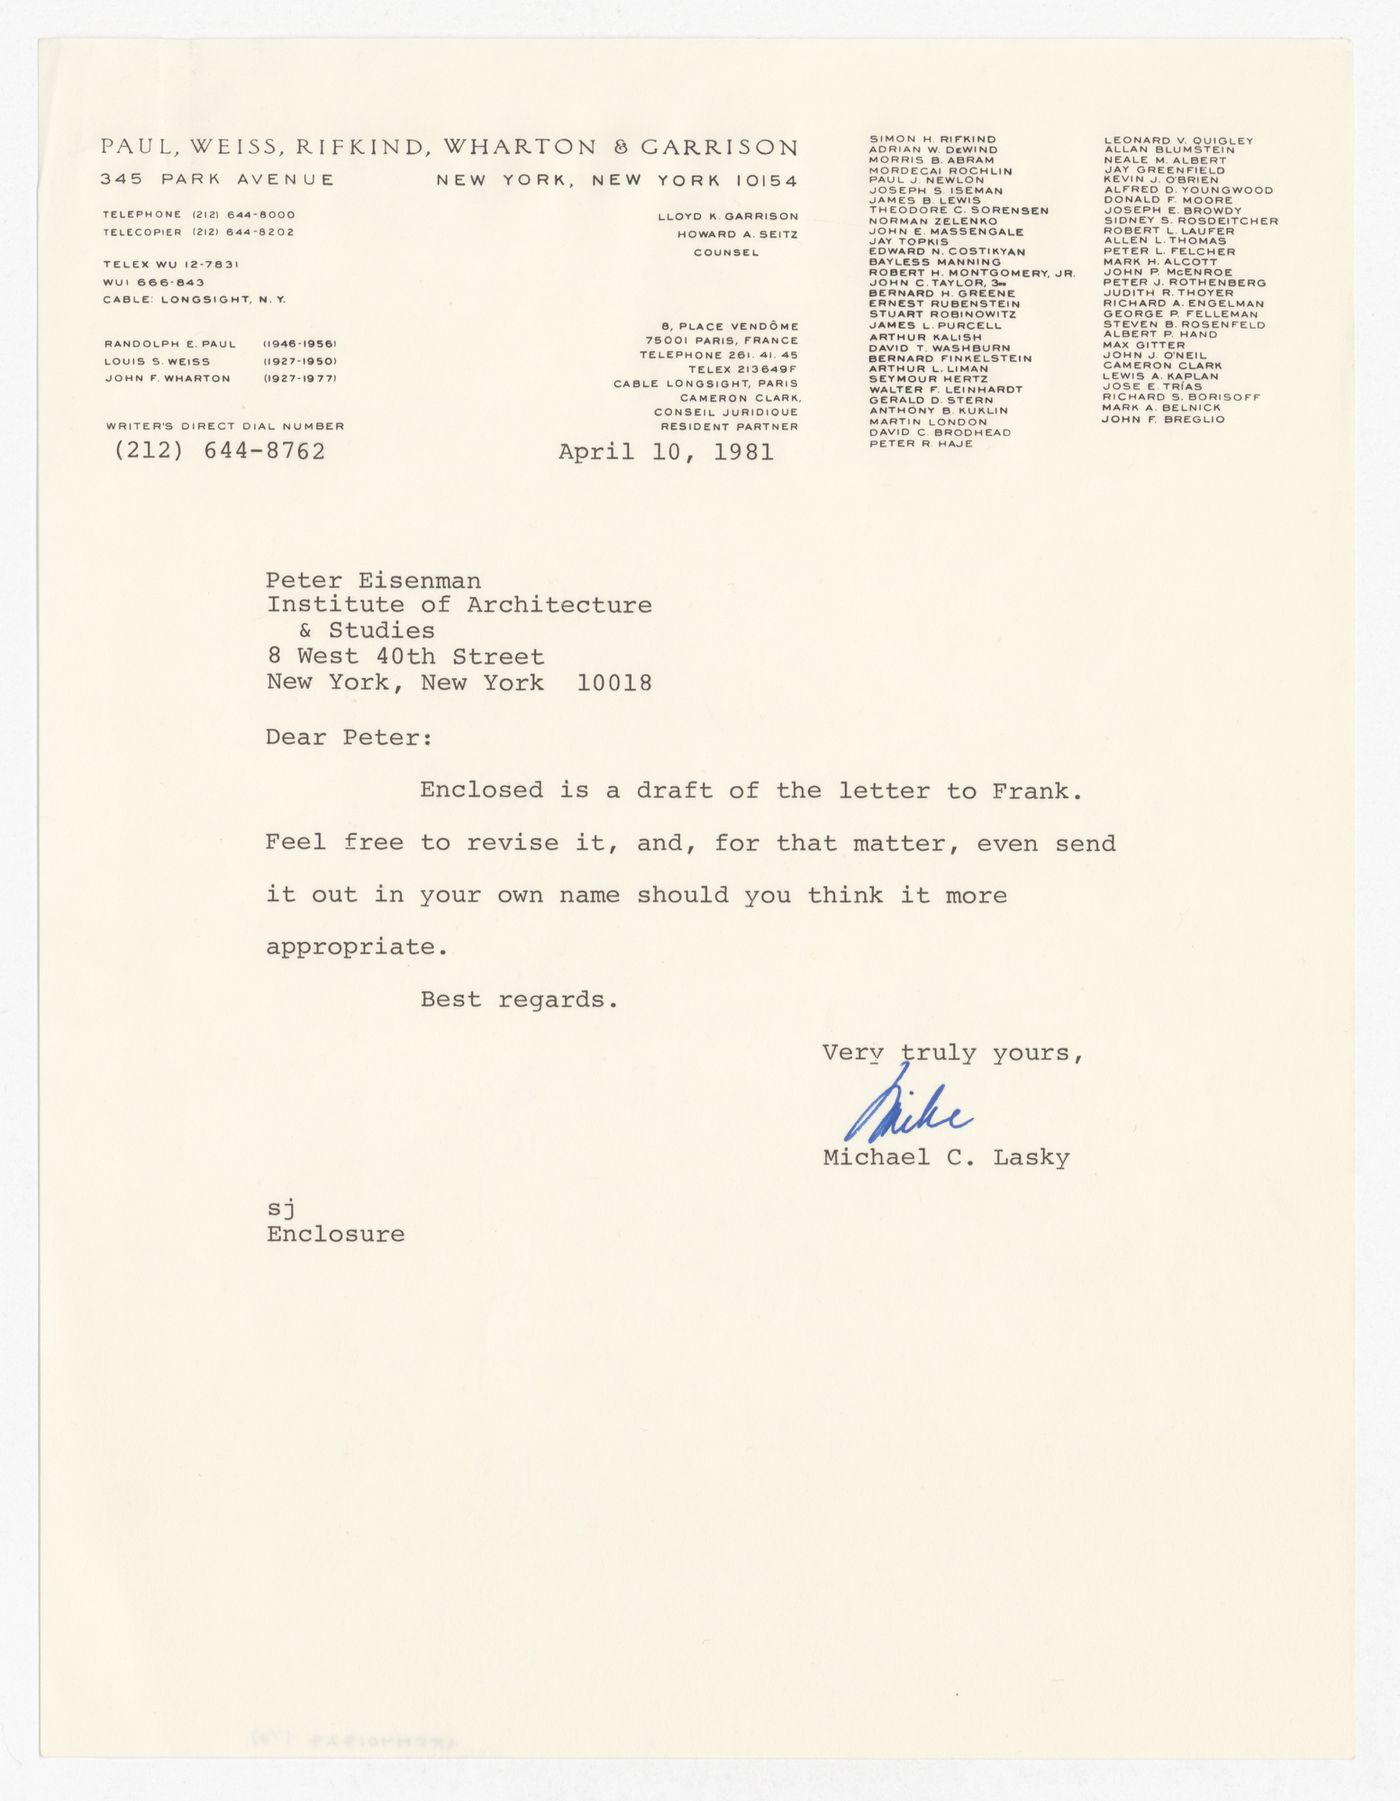 Letter from Michael C. Lasky to Peter D. Eisenman with attached draft letter to Frank Urbanowski about agreement between IAUS and MIT Press to address the cumulative operating deficit for Oppositions Journal for 1977-1980  with annotations by Peter D. Eisenman